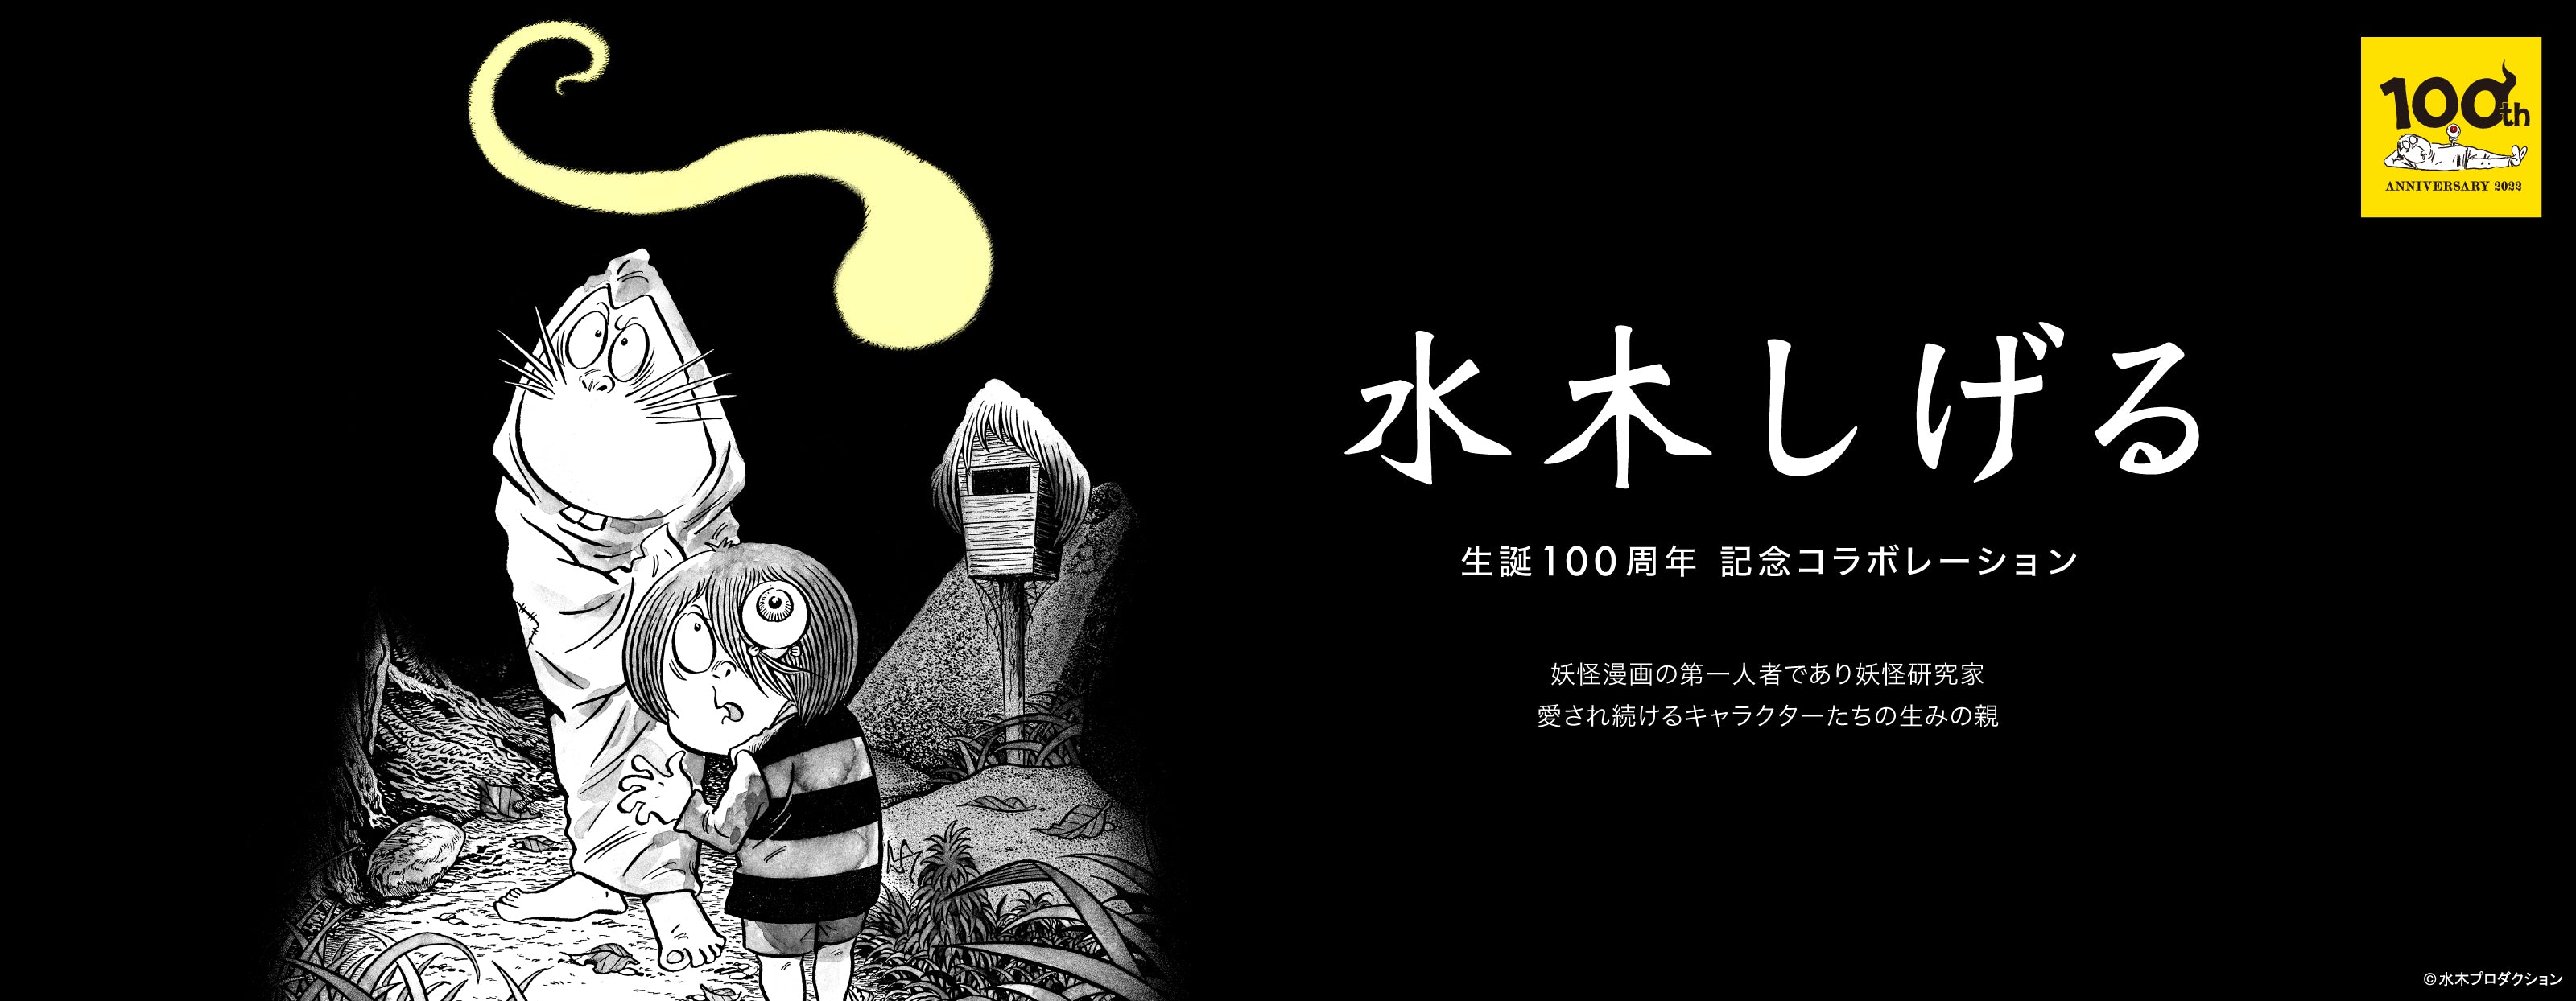 Shigeru Mizuki, a manga artist and yokai researcher who was a leading figure in yokai manga and had a great influence on the history of Japanese manga. From his masterpiece "GeGeGe no Kitaro", Kitaro, Eyeball Father, Nezumi Otoko, Ittan Momen, Nurikabe. In addition, various yokai from works such as "Akuma-kun" by Shigeru Mizuki are gathered together. Please enjoy the mysterious and entertaining&nbsp;Graniph collaboration release that allows you to immerse yourself in the world of yokai.[ssorder:-20220307]